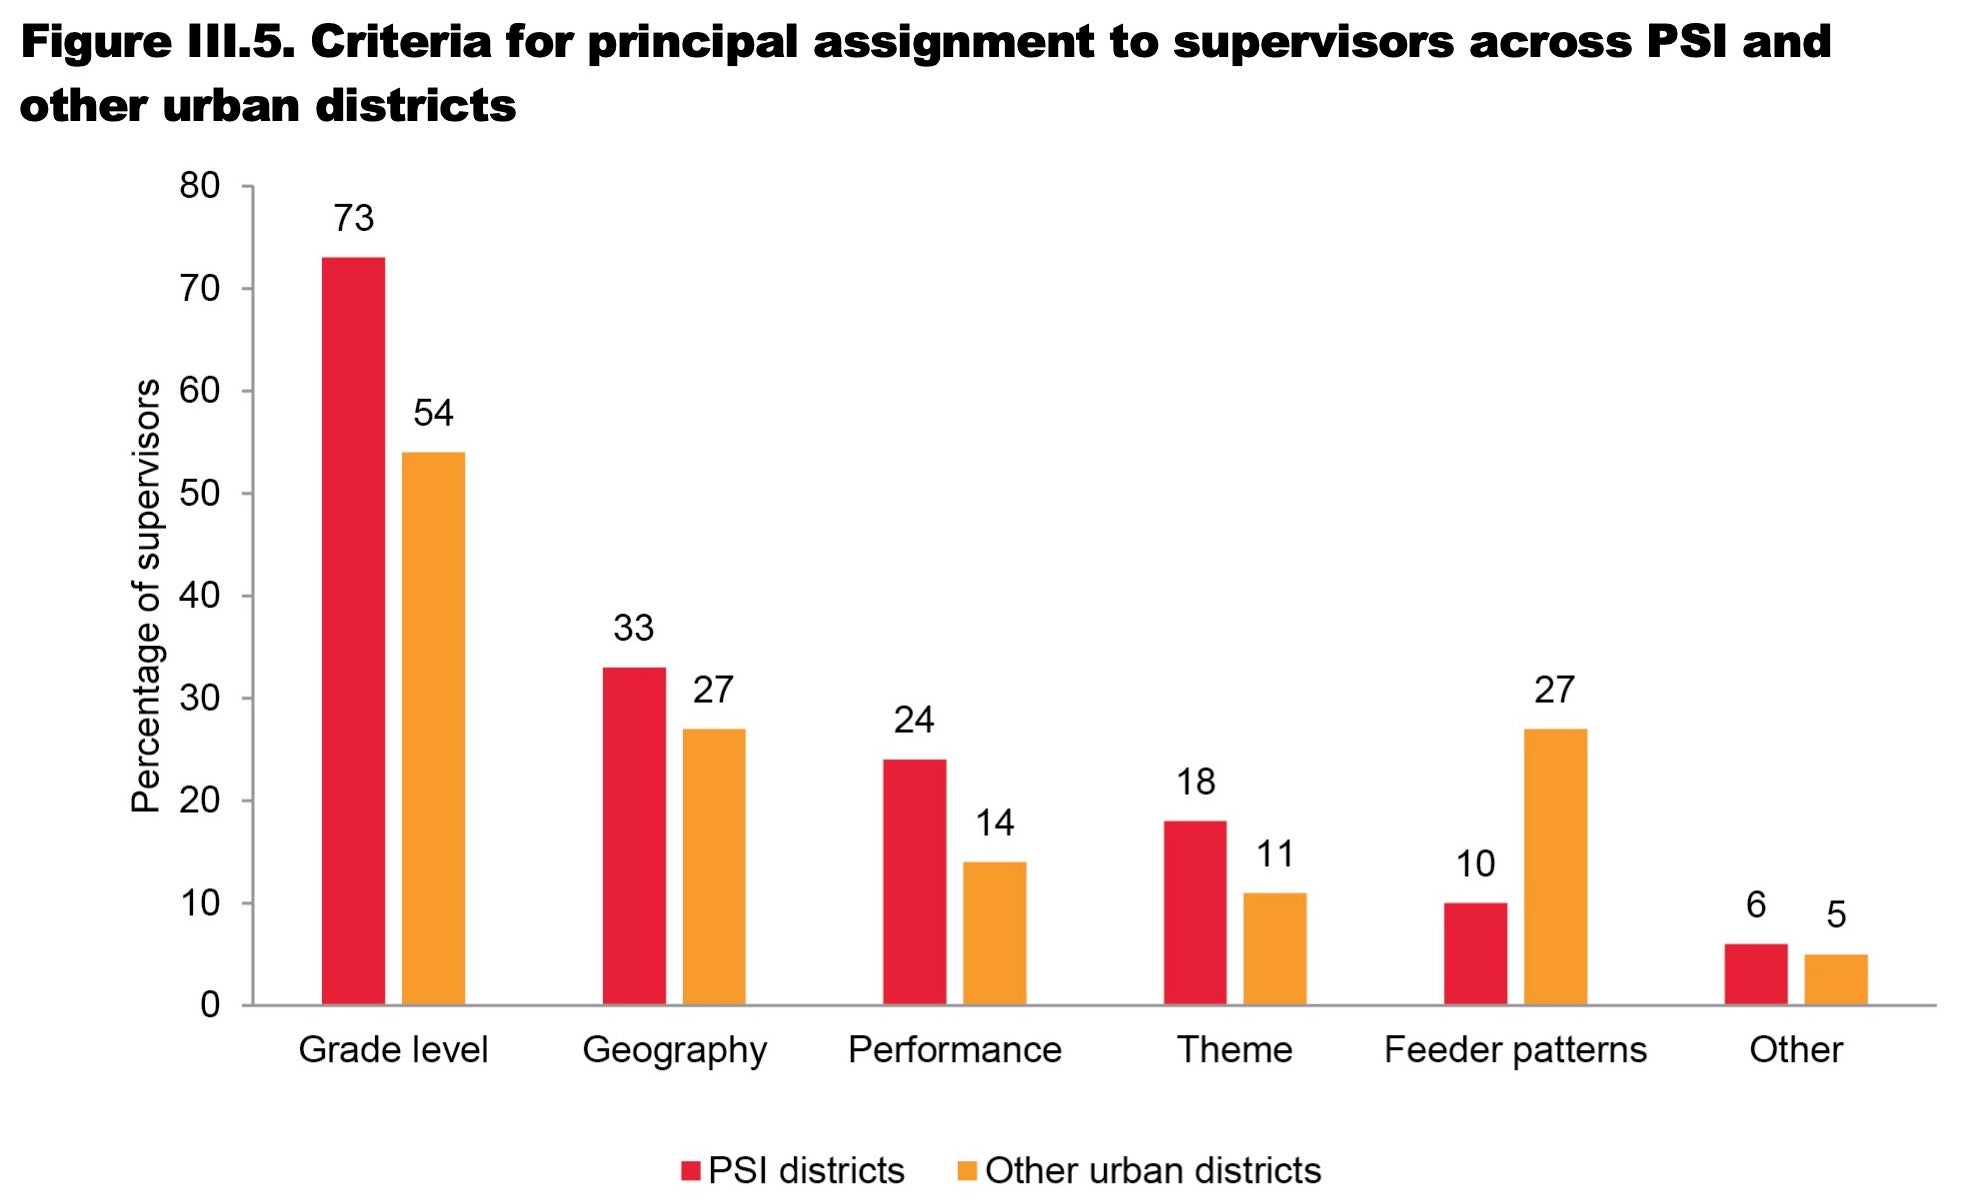 Seventy-three percent of supervisors in PSI districts indicated that grade level was a criterion by which their principals were assigned to them.